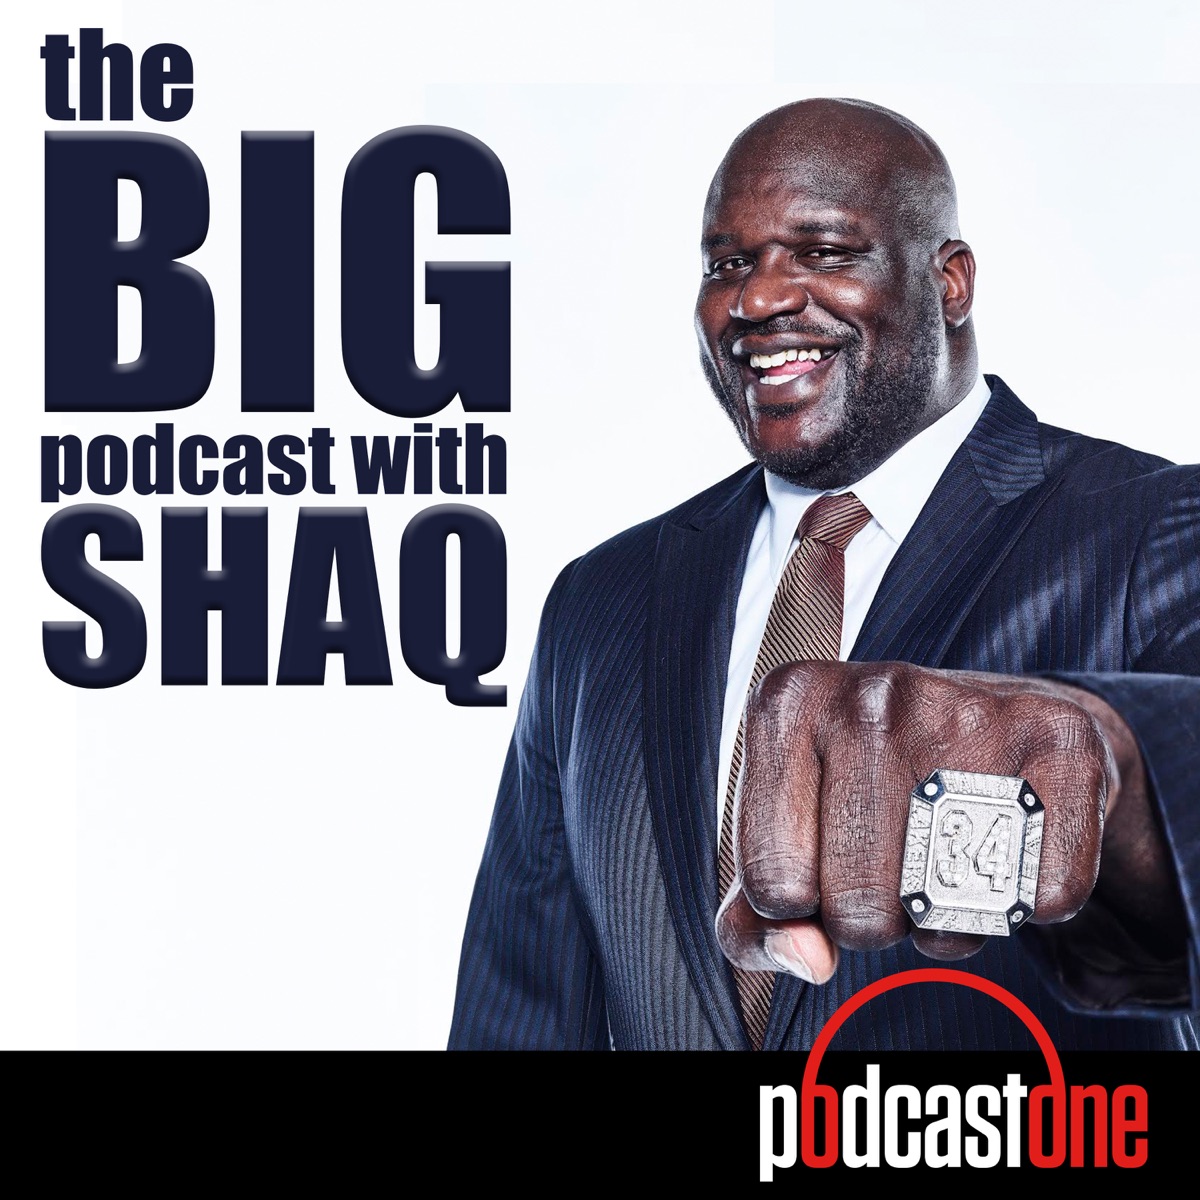 Black History Month: Shaquille O'Neal is legend far beyond